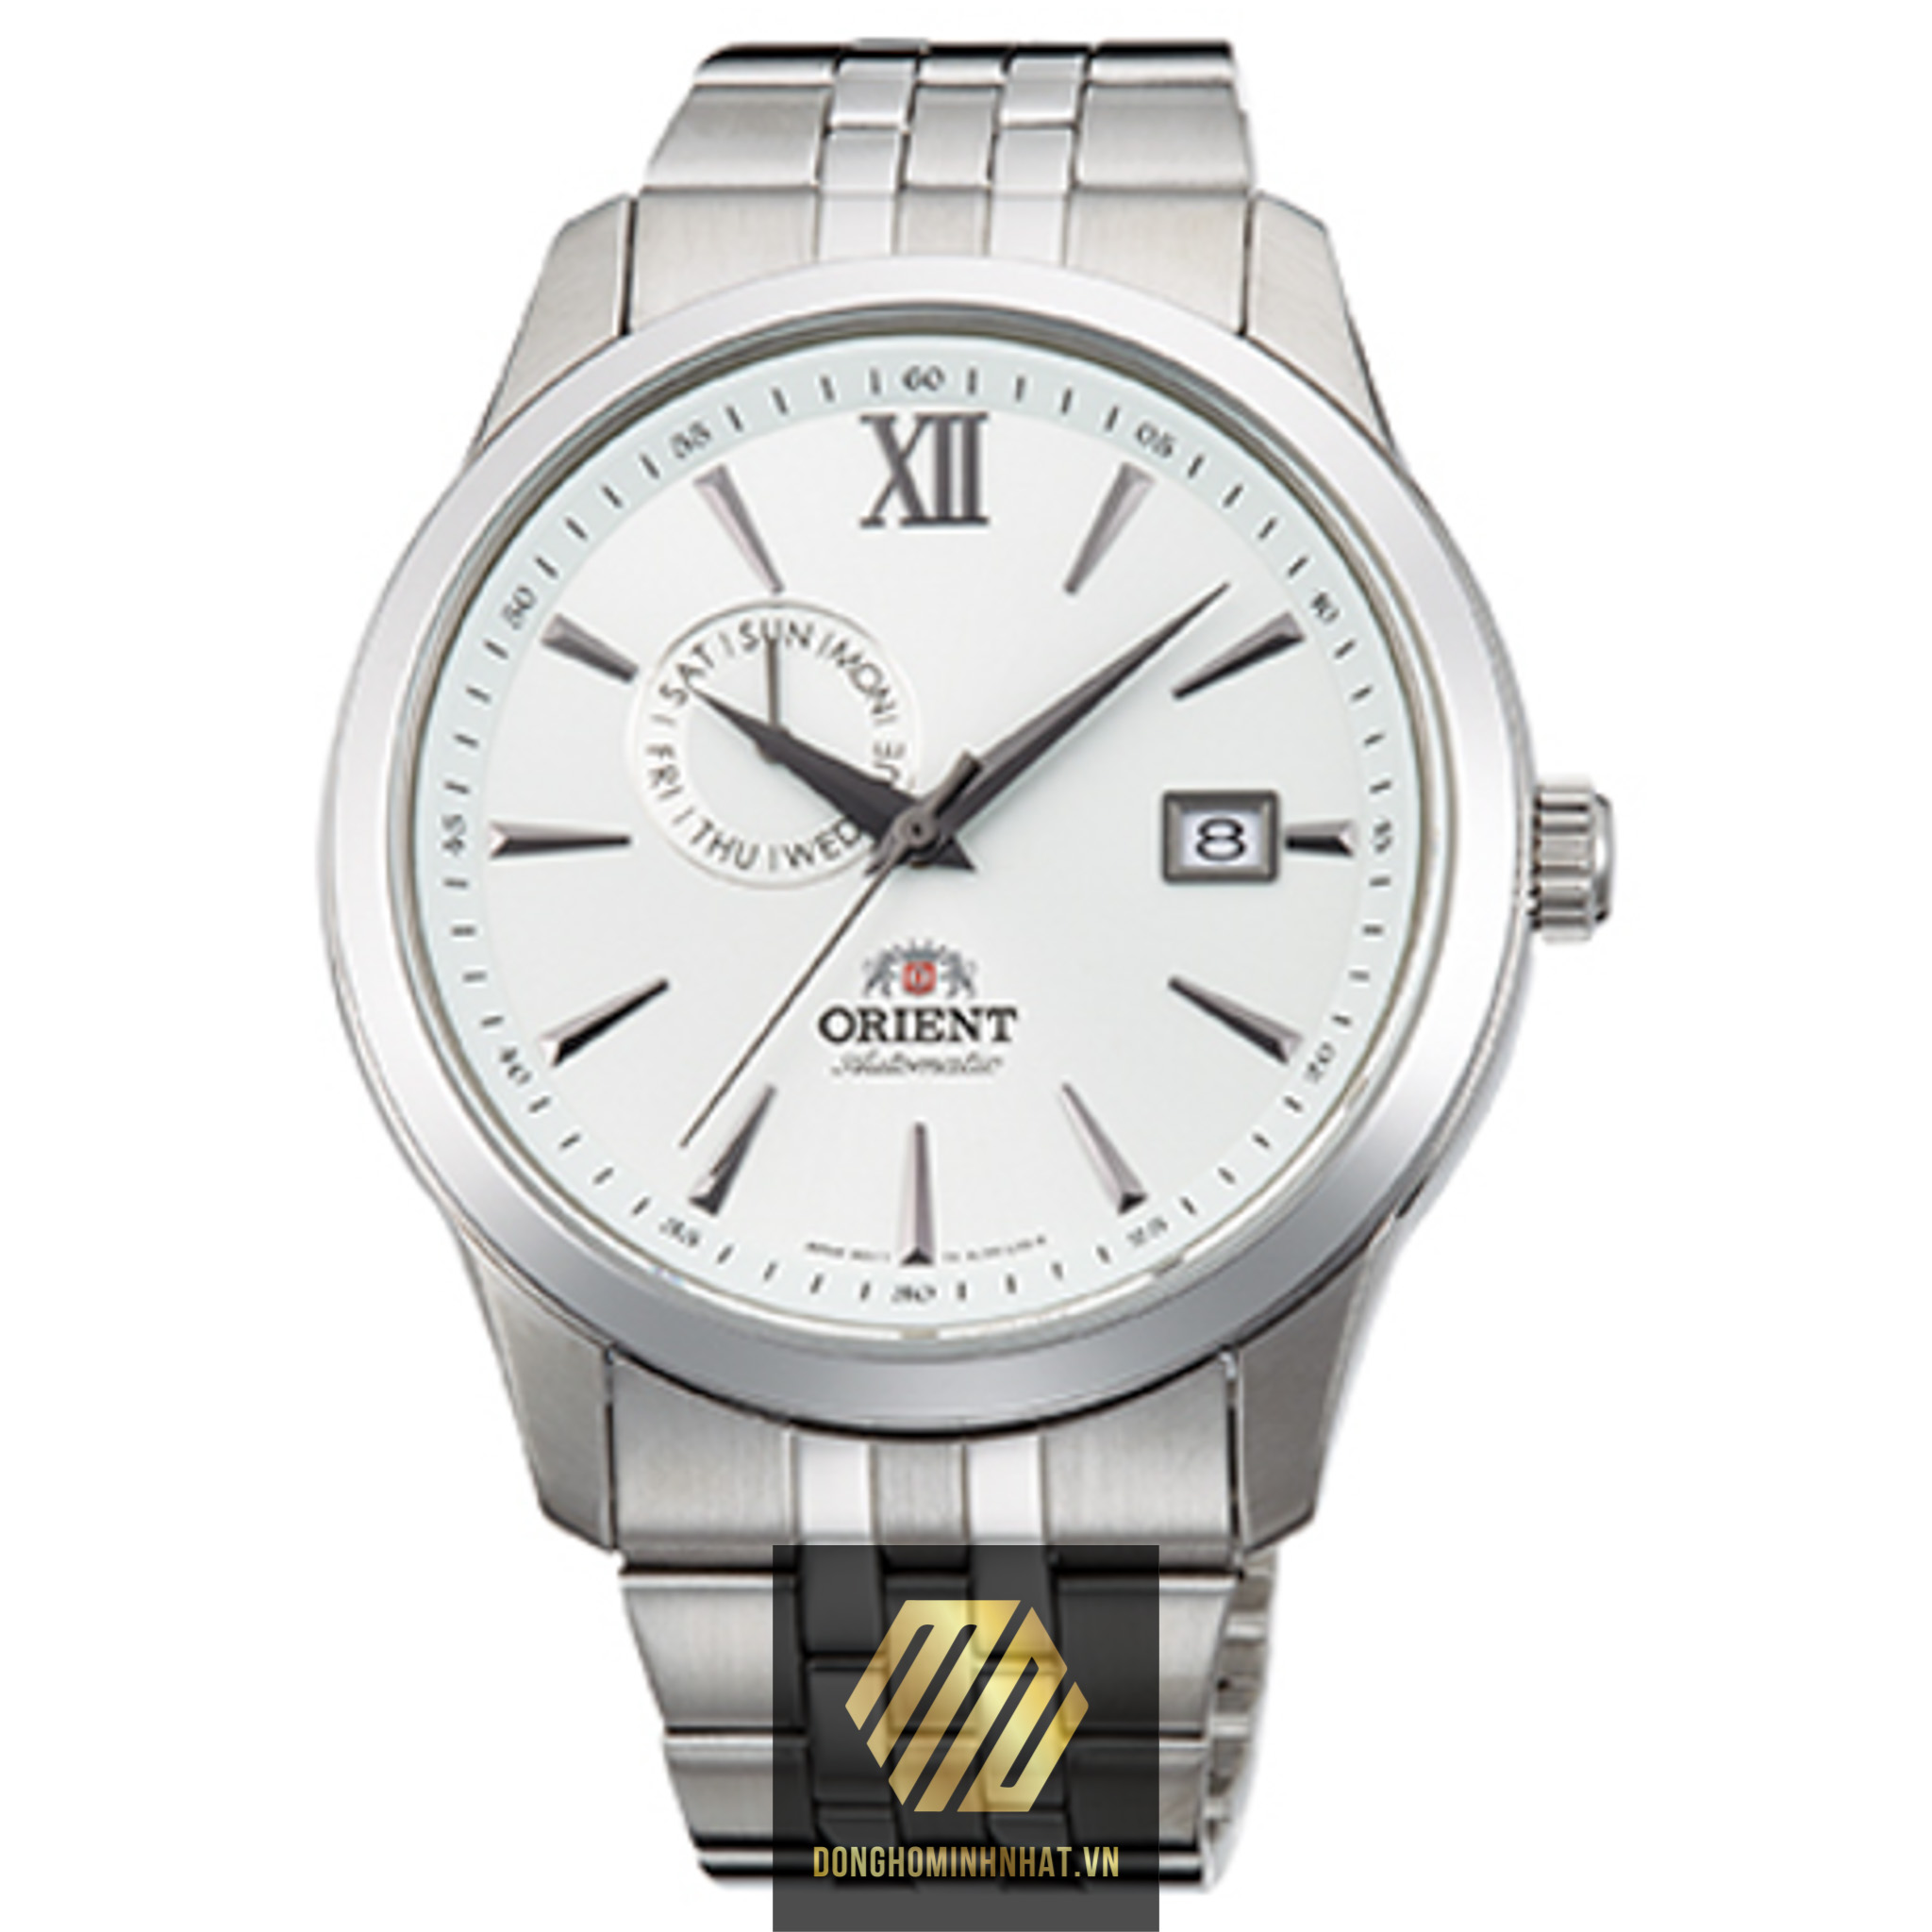 ĐỒNG HỒ ORIENT FAL00003W0 LAETHER WHITE DAIL MEN’S WATCH